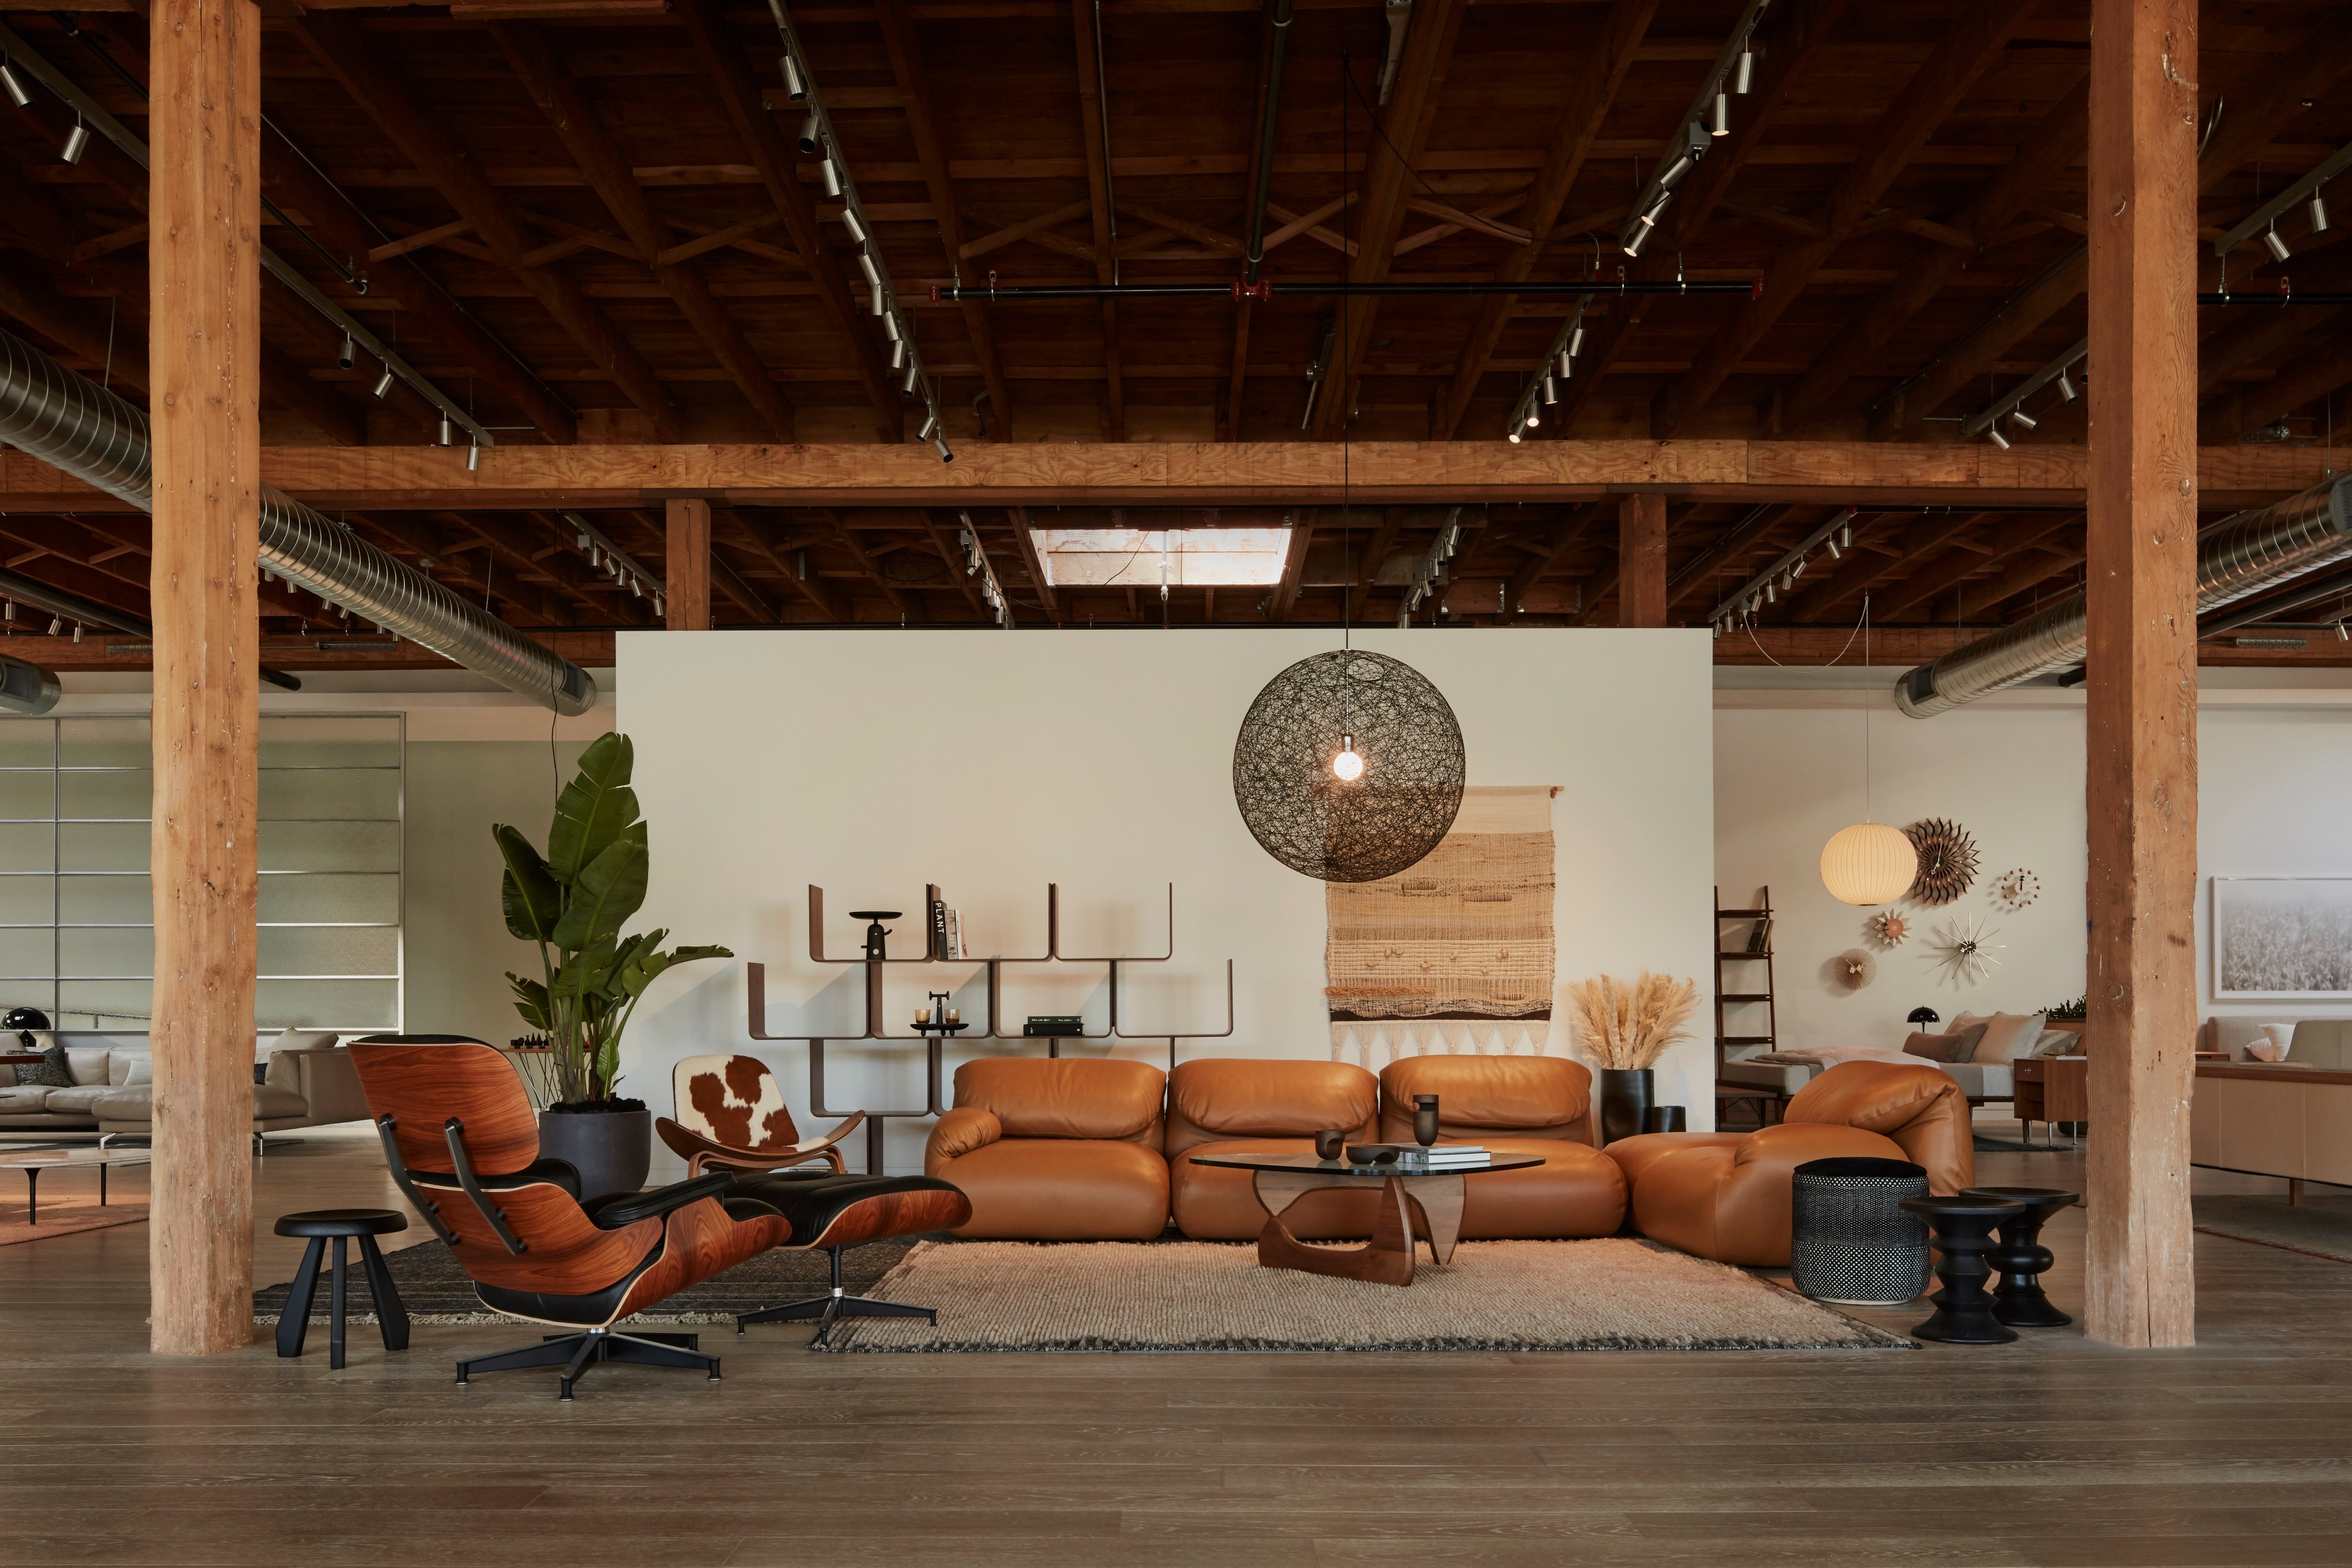 Design Within Reach's new San Francisco showroom features brown leather couches and Eames chairs.